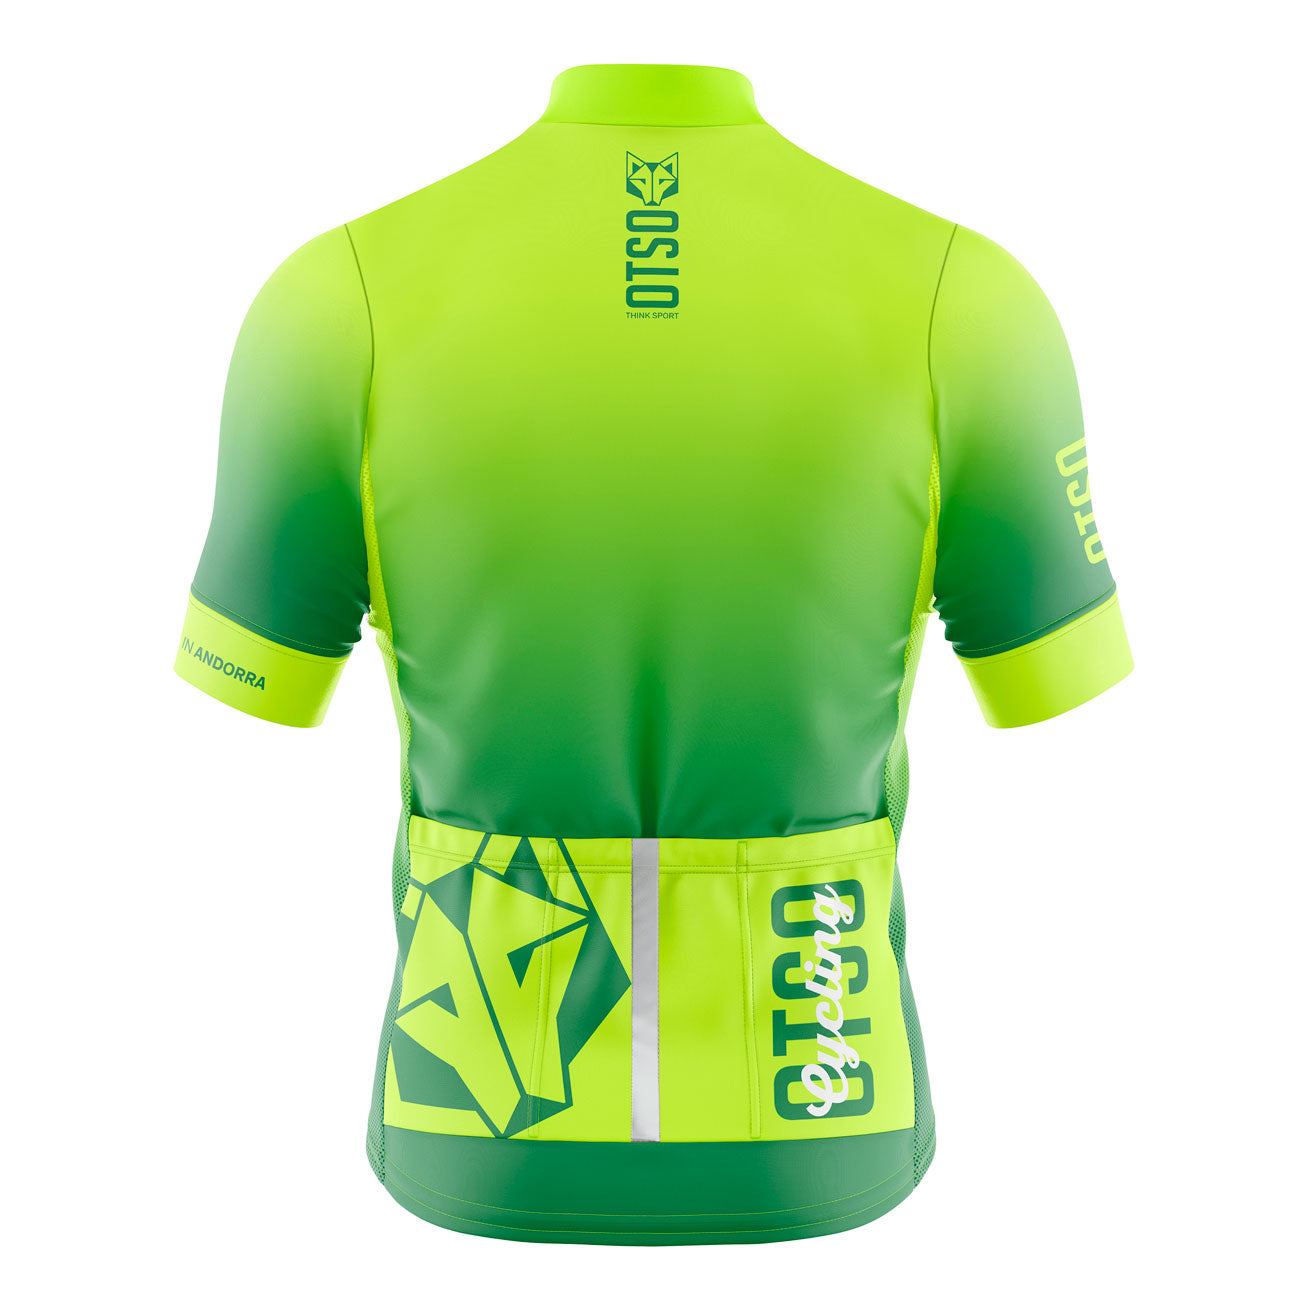 Maillot de ciclismo manga corta mujer - Fluo Green (Outlet)